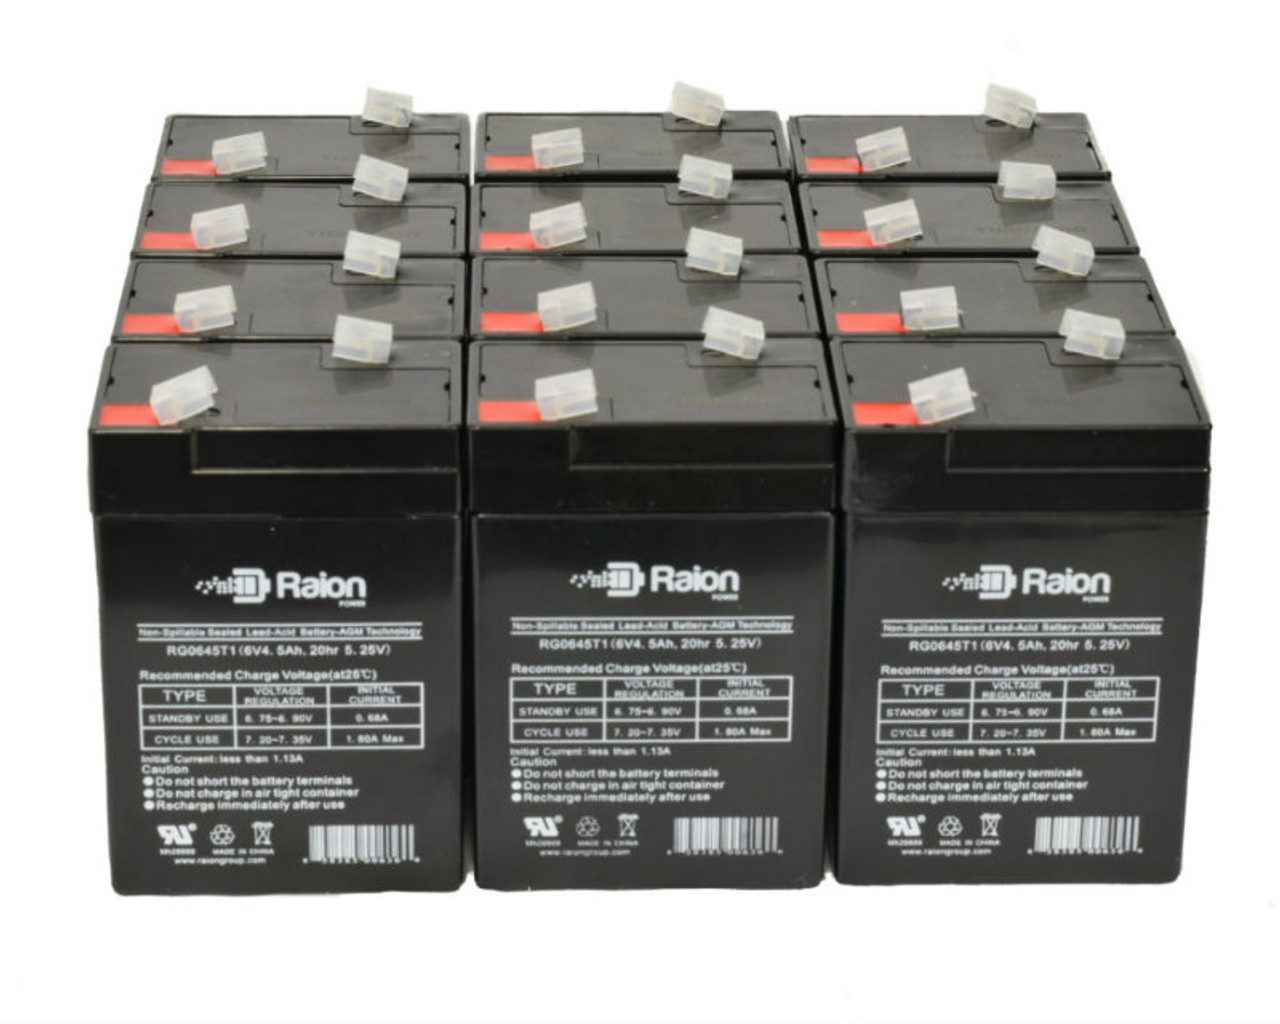 Raion Power 6V 4.5Ah Replacement Emergency Light Battery for High-Lites 39-21 - 12 Pack